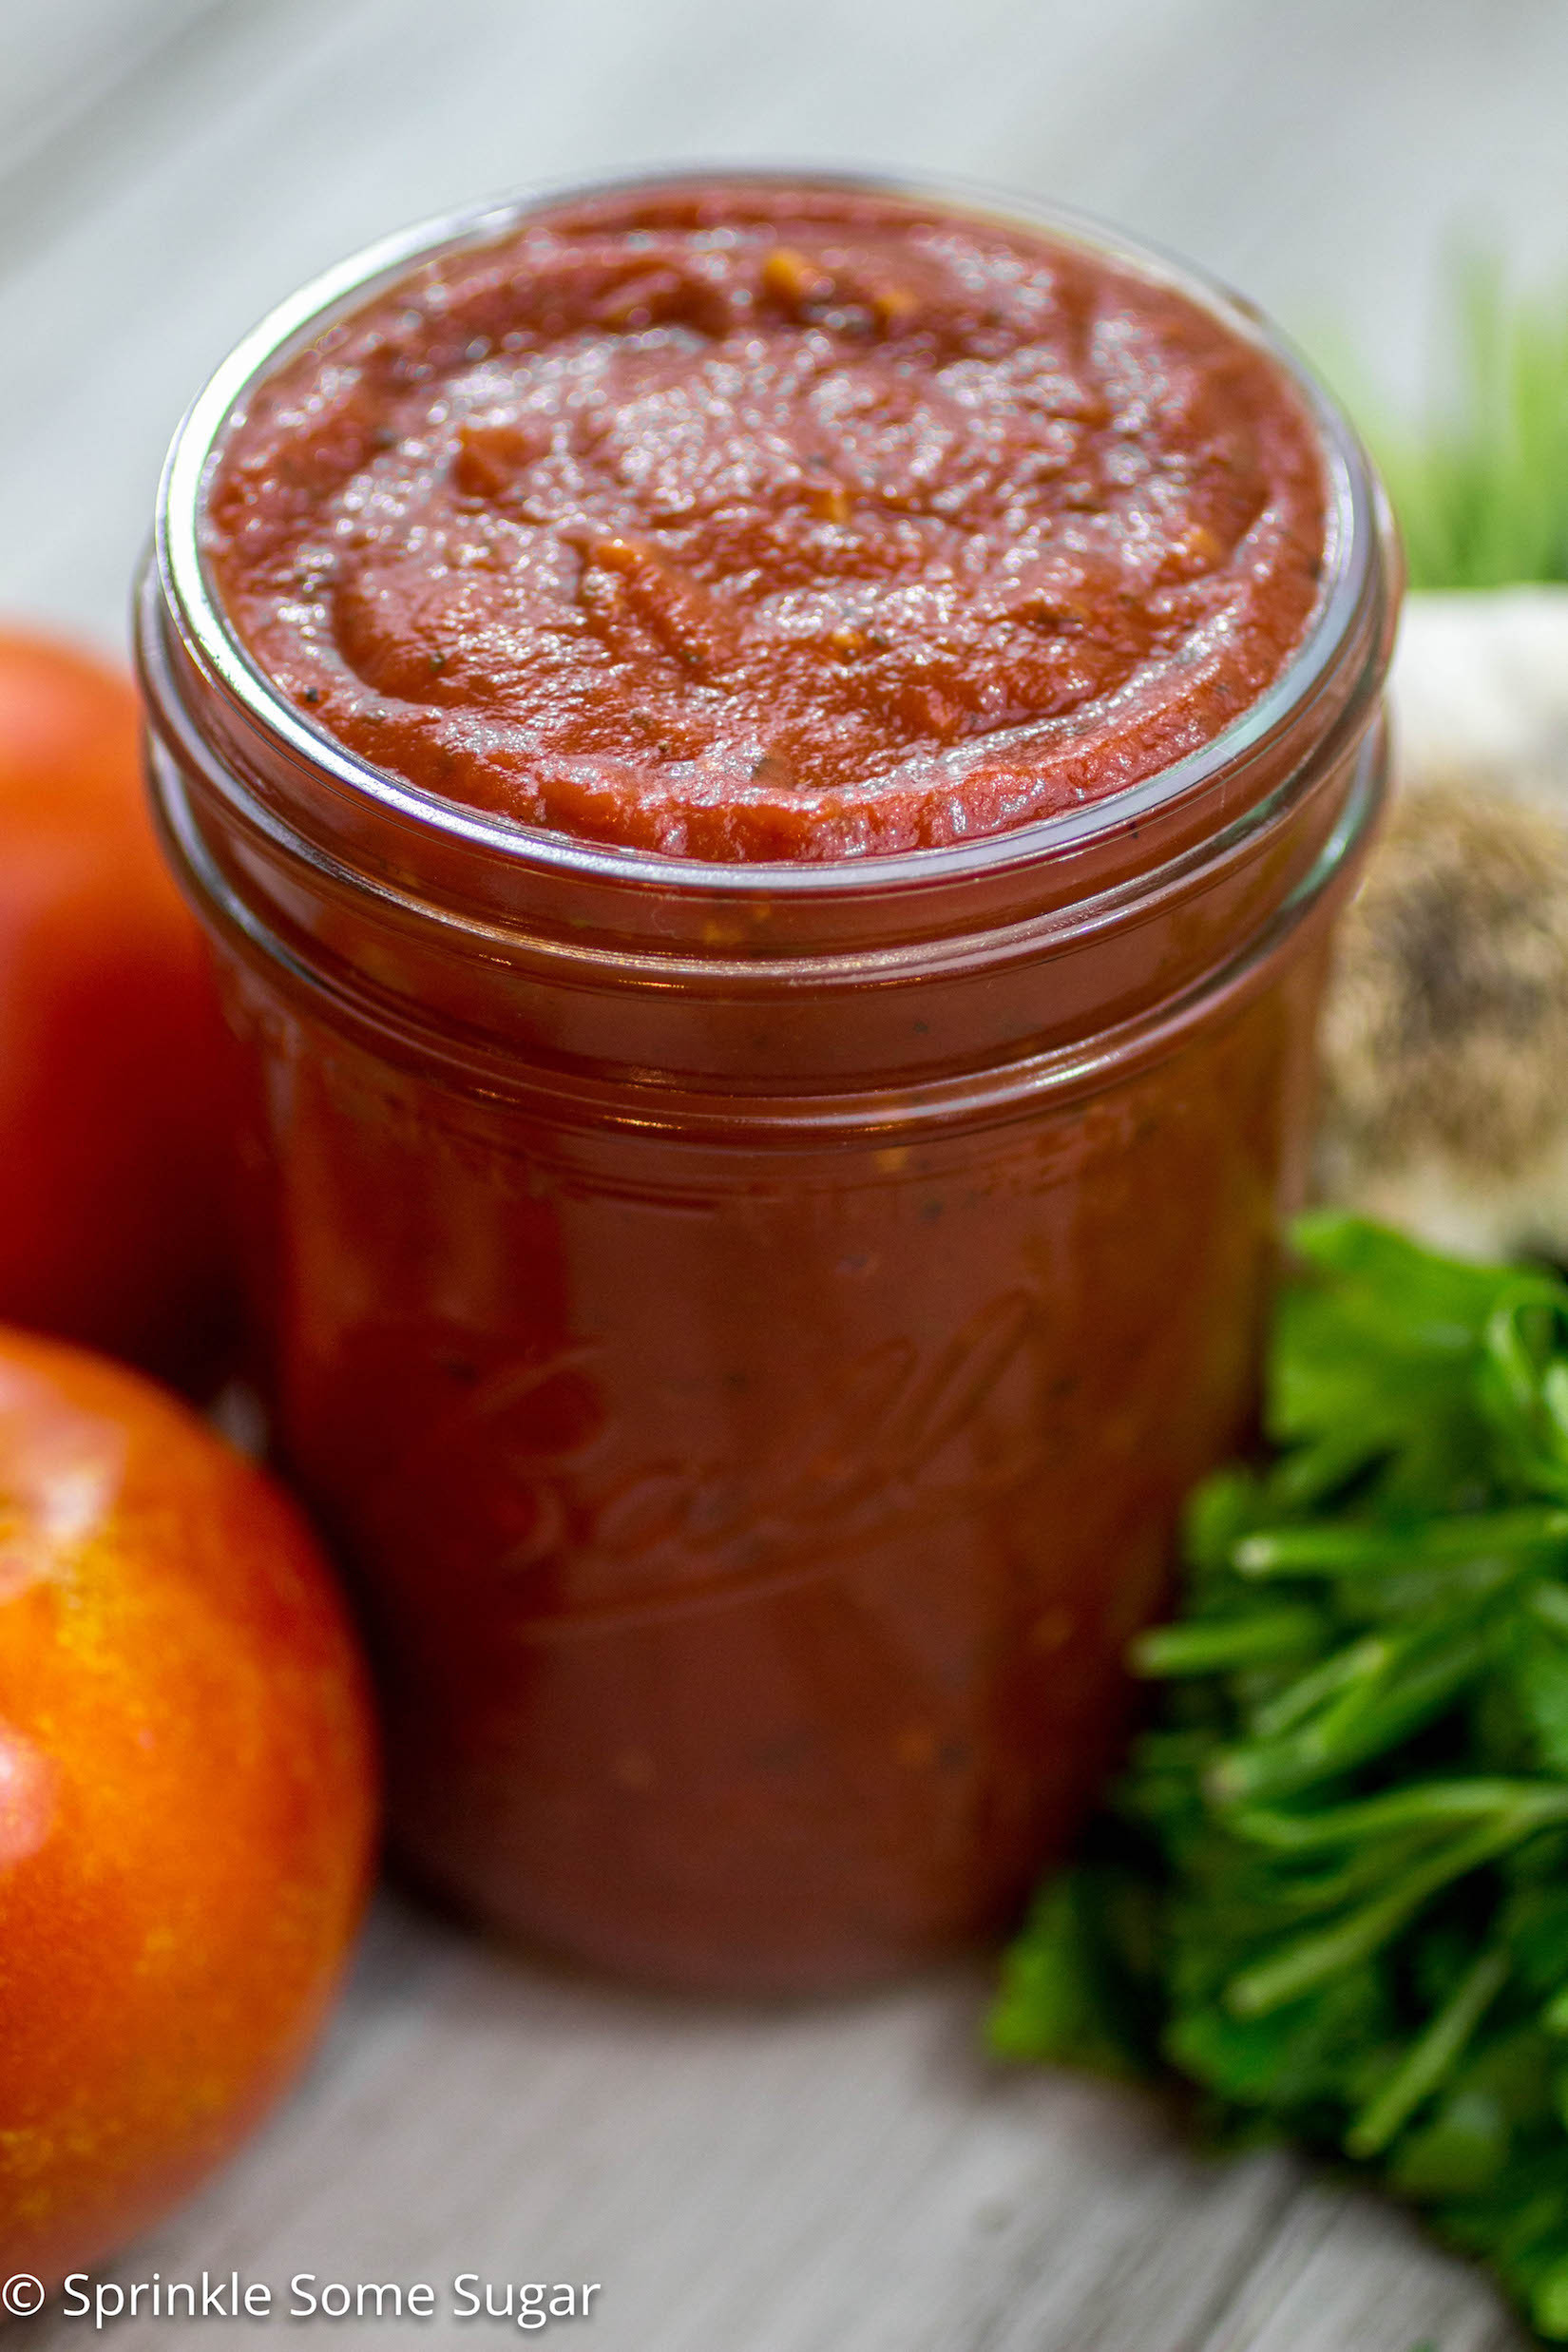 Healthy Pizza Sauce Store Bought
 The BEST Homemade Pizza Sauce Sprinkle Some Sugar